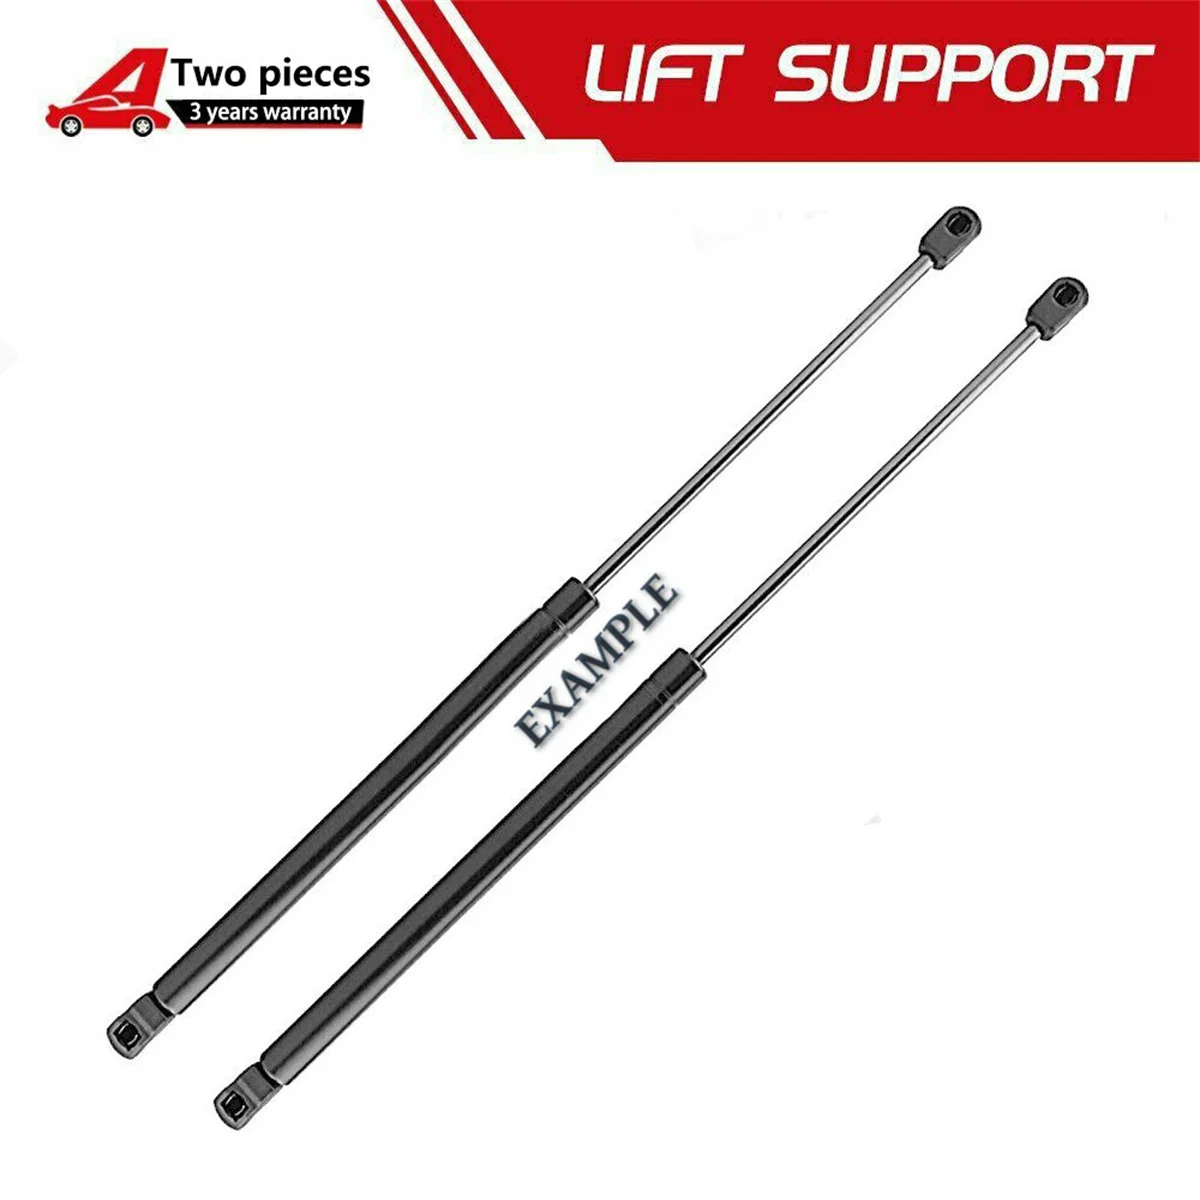 

2X Trunk Lift Supports Struts Shocks Dampers Fits 2014 2015 2016 2017 2018 INFINITI Q50 Extended Length [in] 11.50